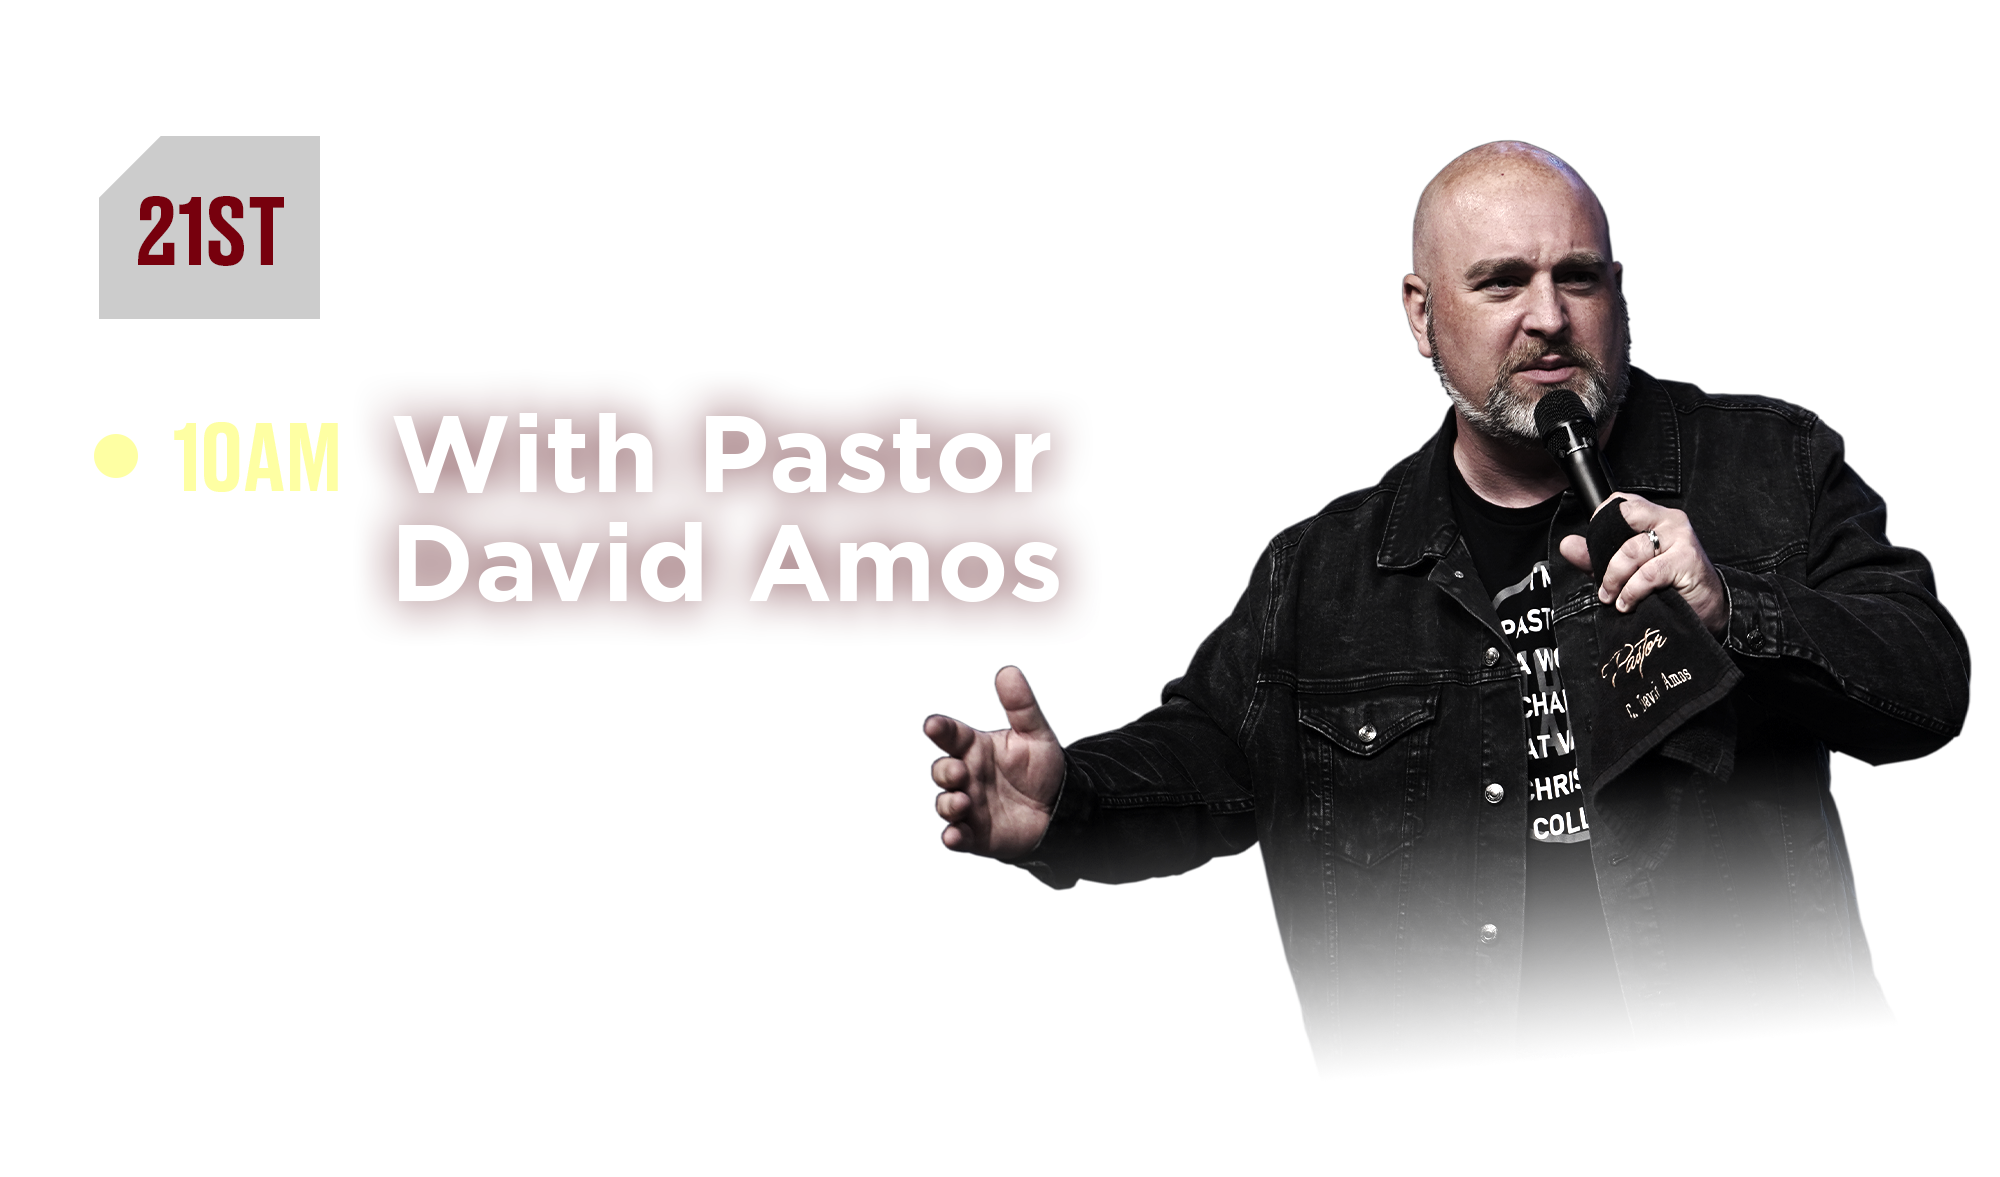 21st Outpouring Thursdays 10AM with Pastor David Amos